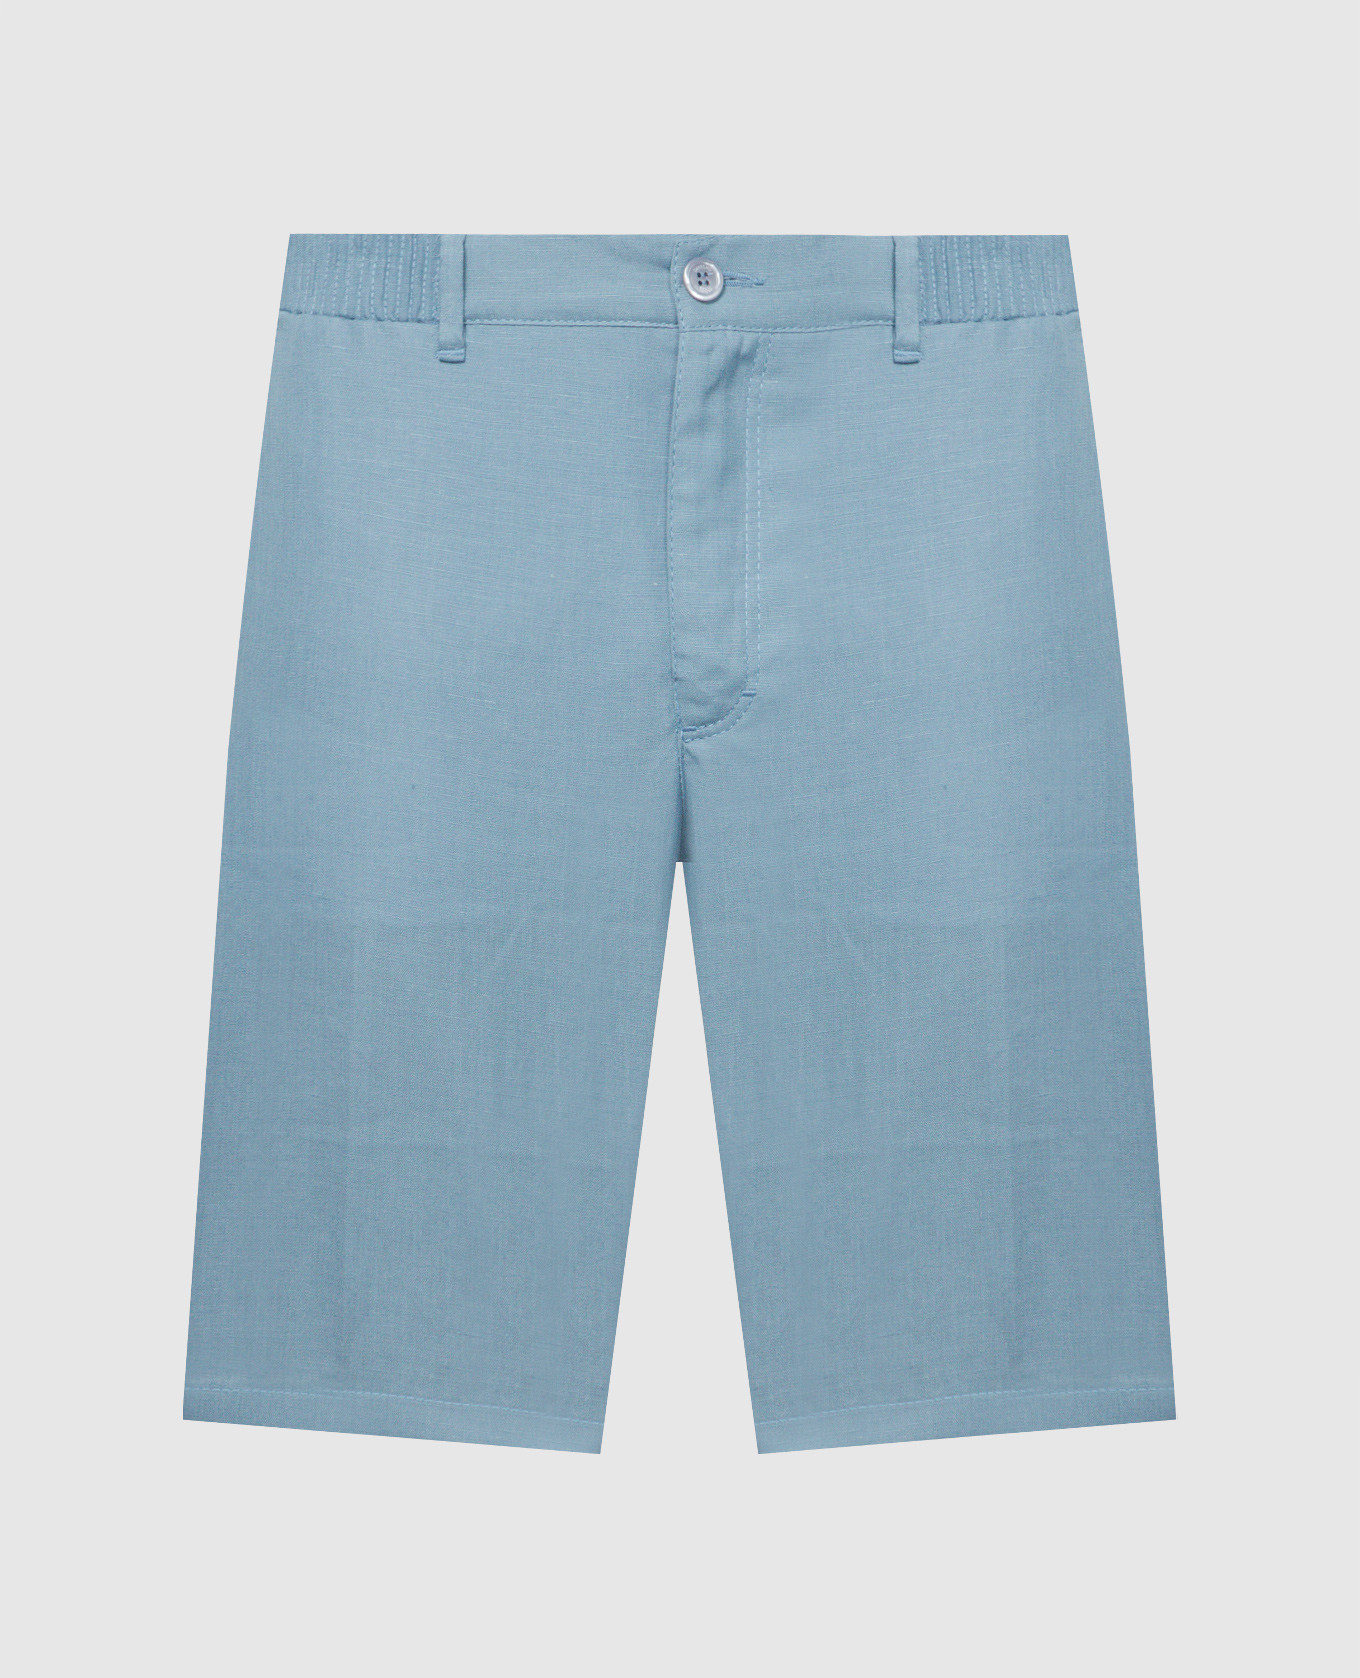 Blue linen shorts with monogram logo embroidery